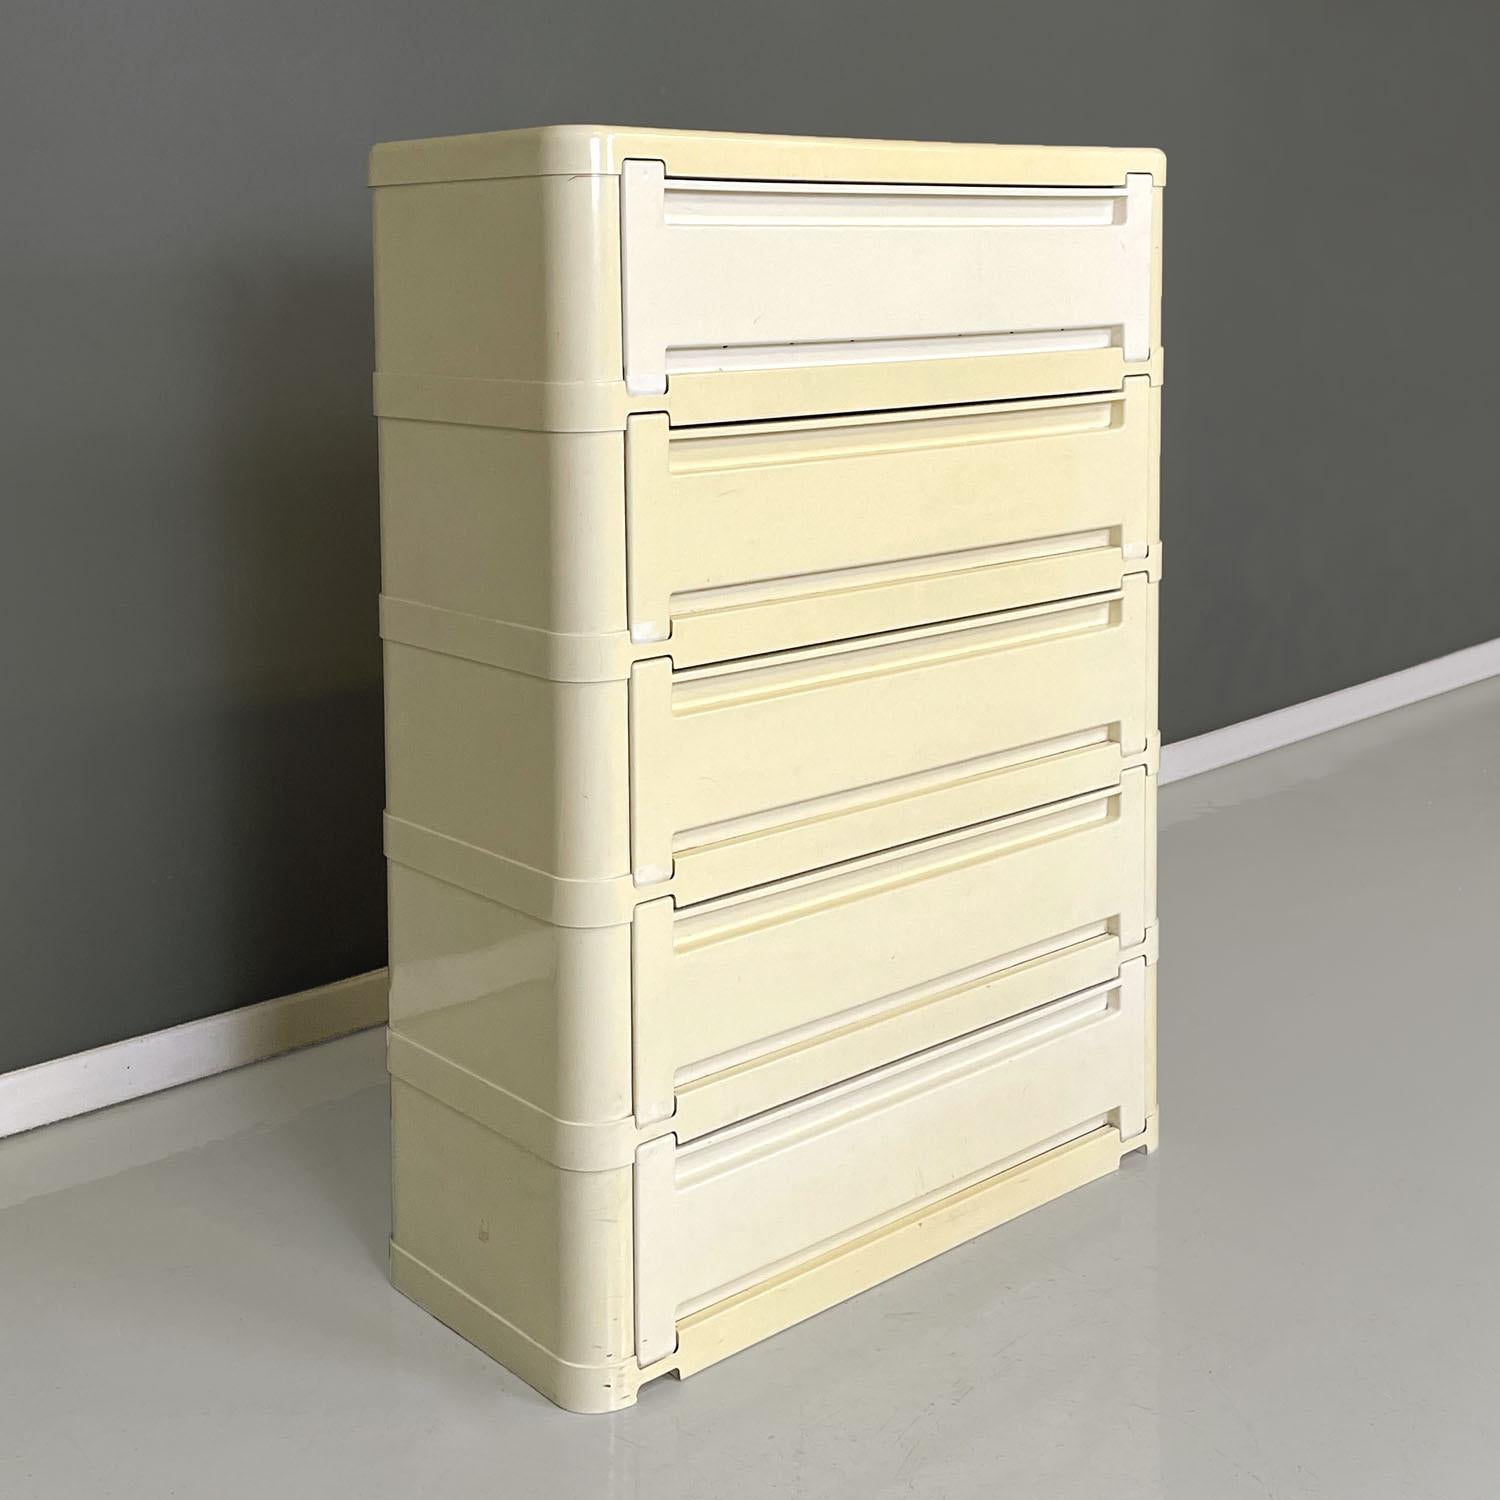 Italian modern modular chest of drawer 4964 by Olaf Von Bohr for Kartell, 1970s
Modular chest of drawers mod. 4964 with rectangular base with rounded corners, in white plastic. The shoe rack is made up of five modules and each module has a drawer